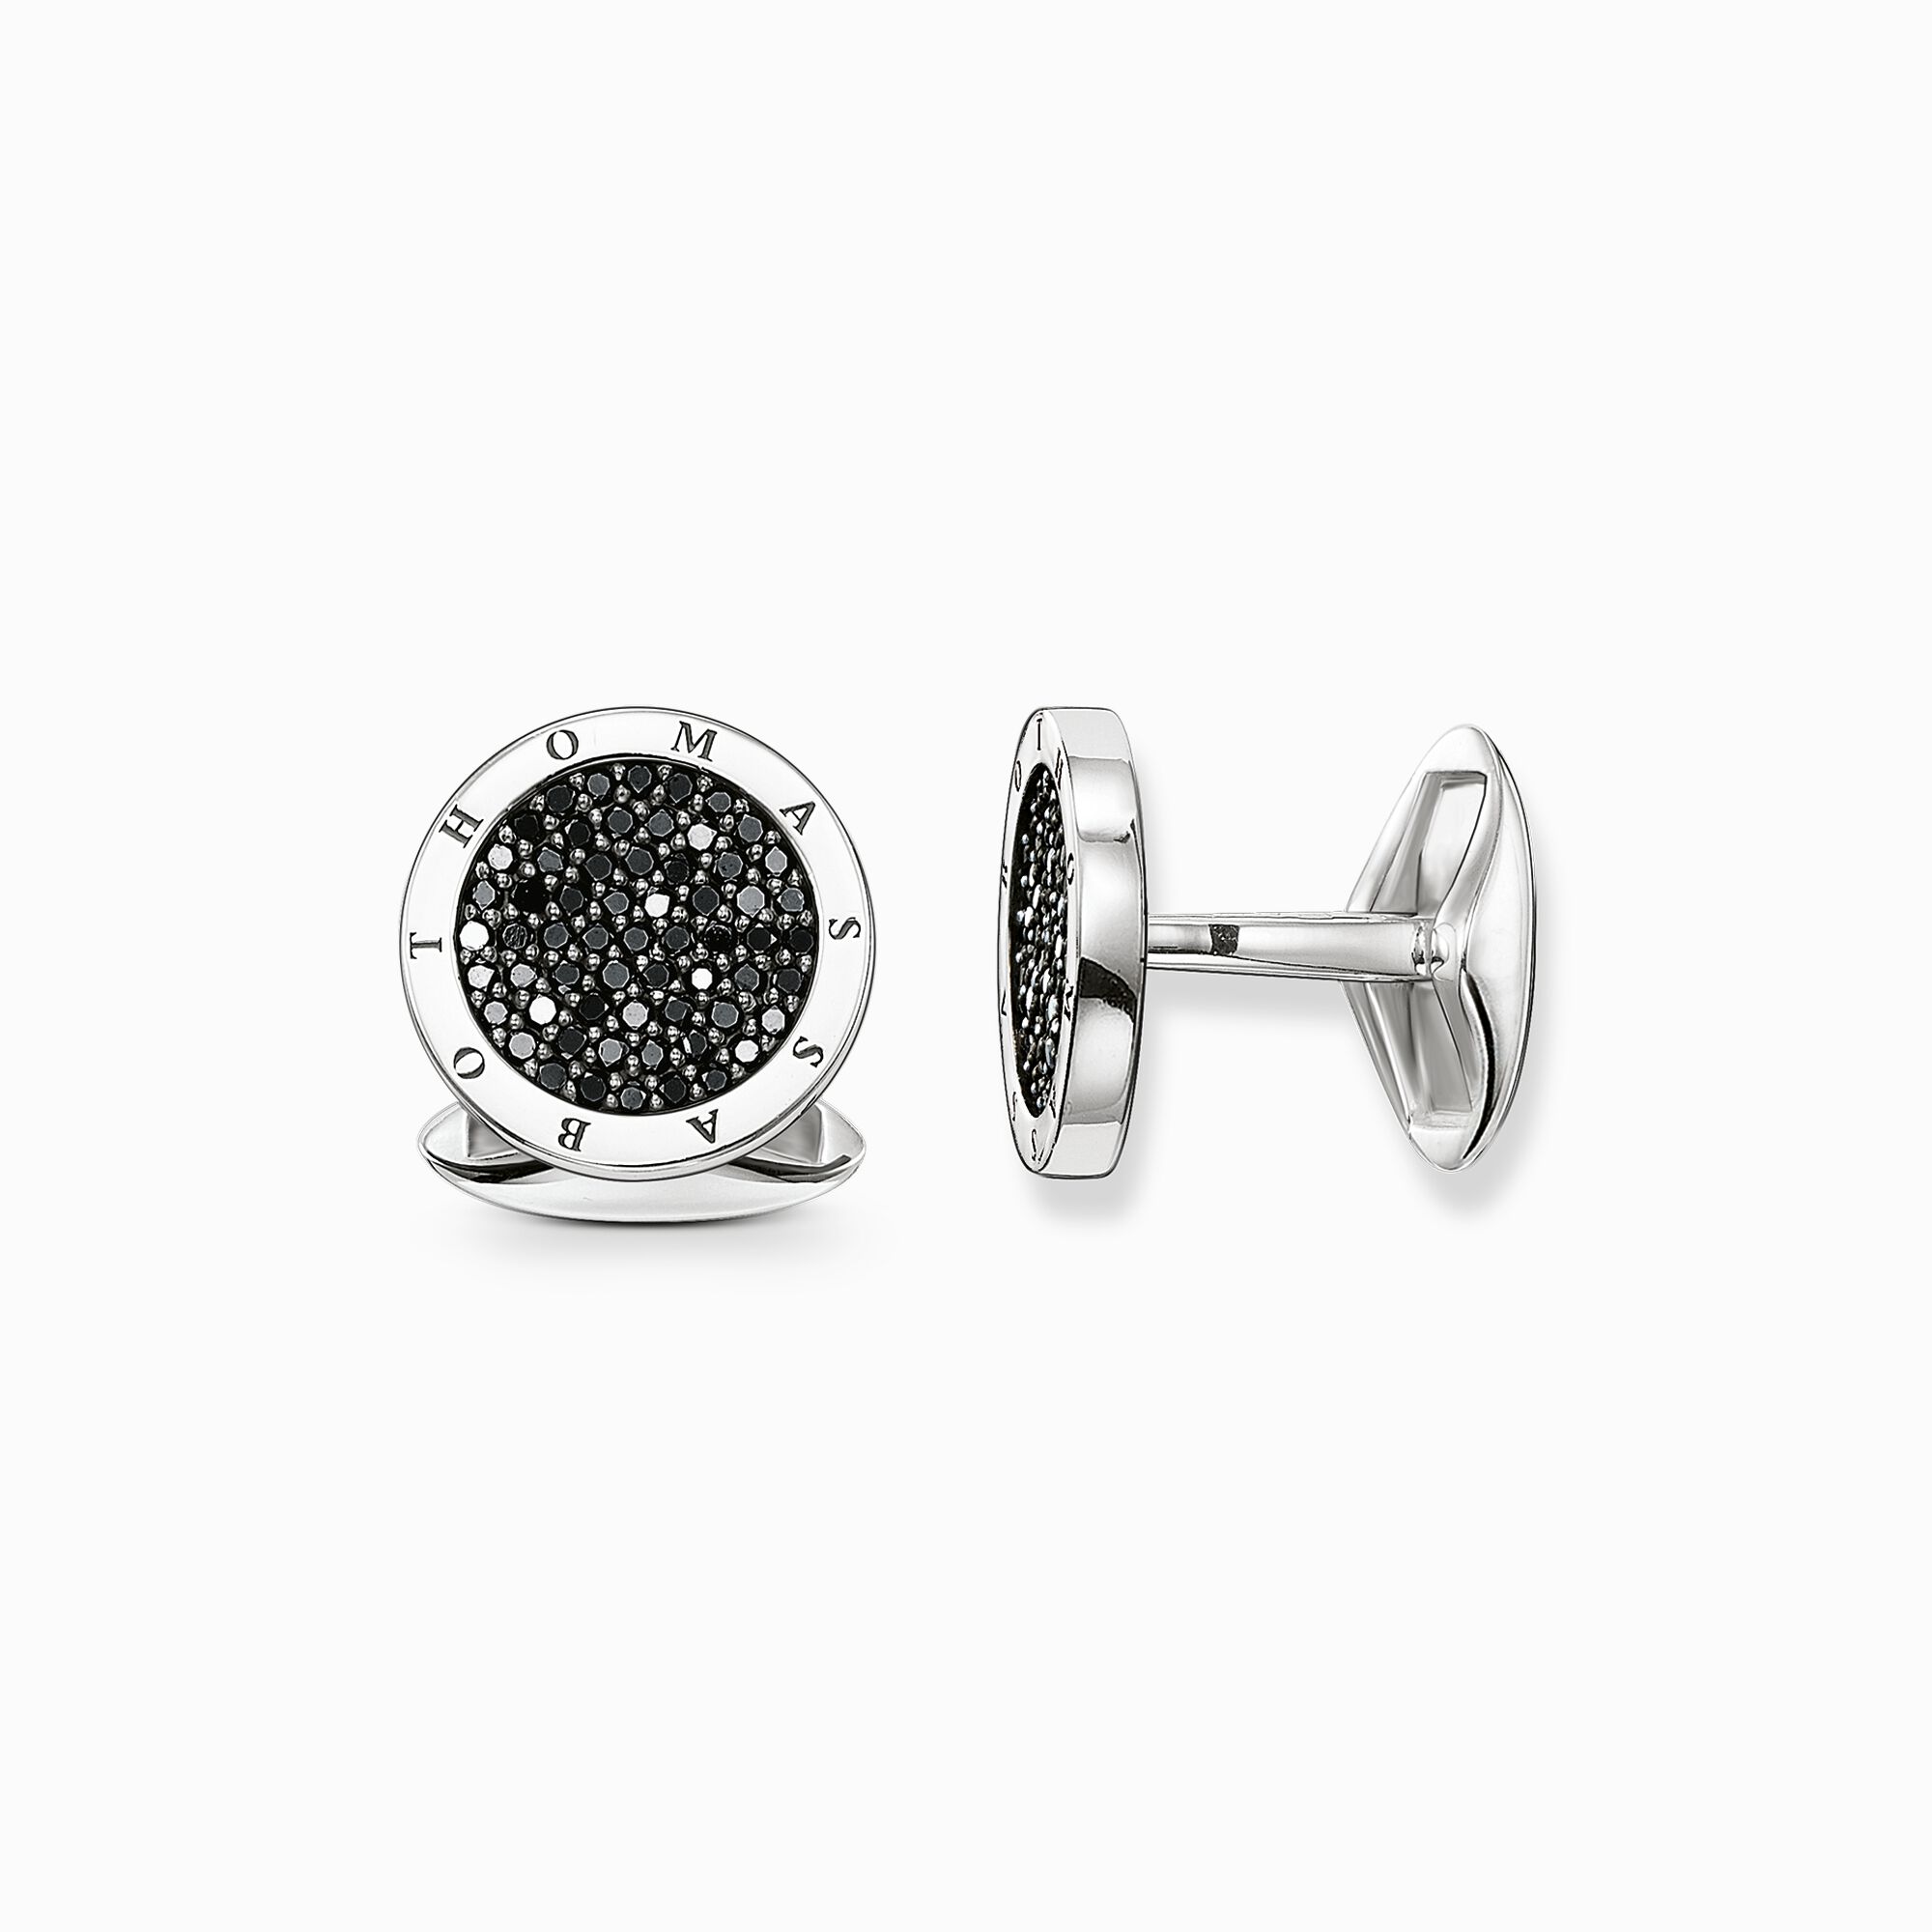 Cufflinks diamond pav&eacute; from the  collection in the THOMAS SABO online store